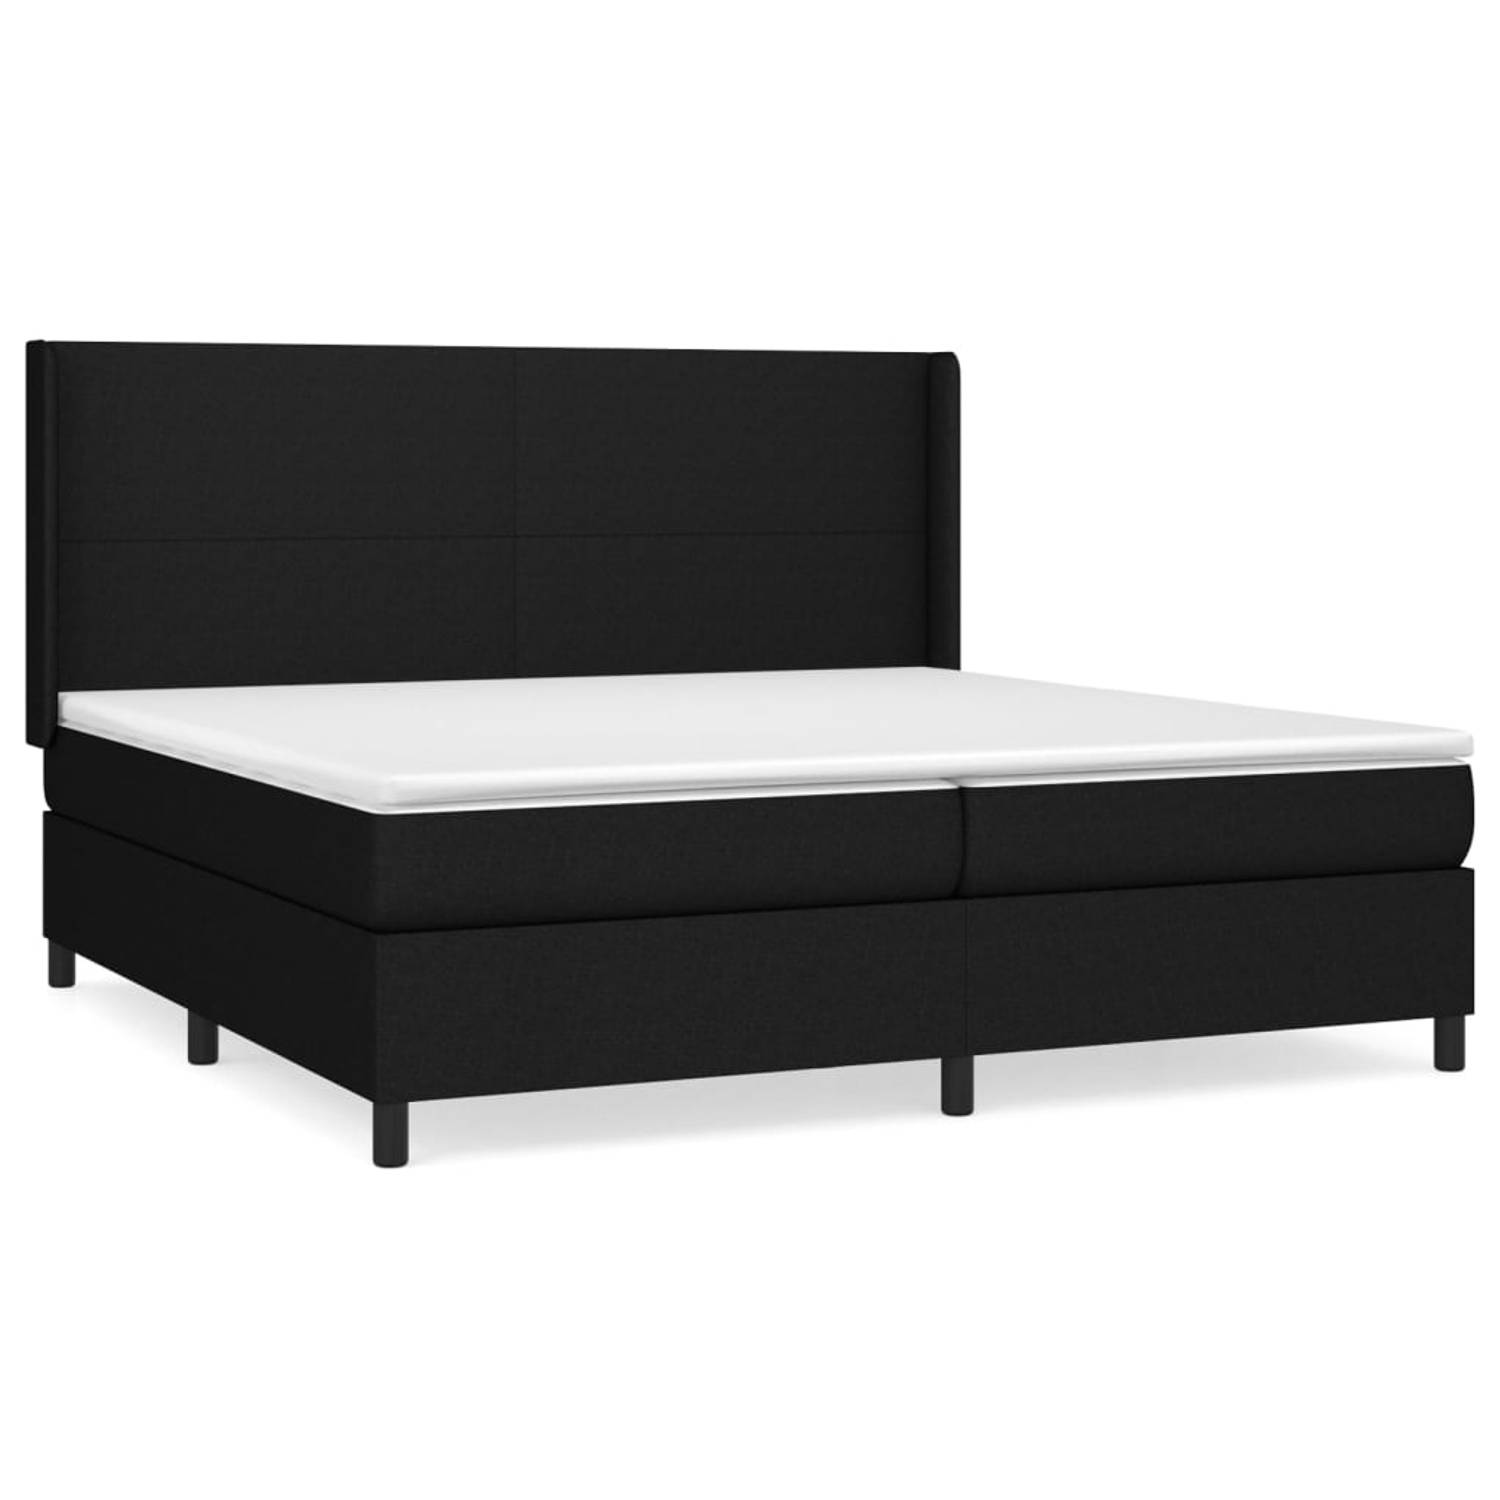 The Living Store Boxspringbed - Bed - 203 x 203 x 118/128 cm - Zwart